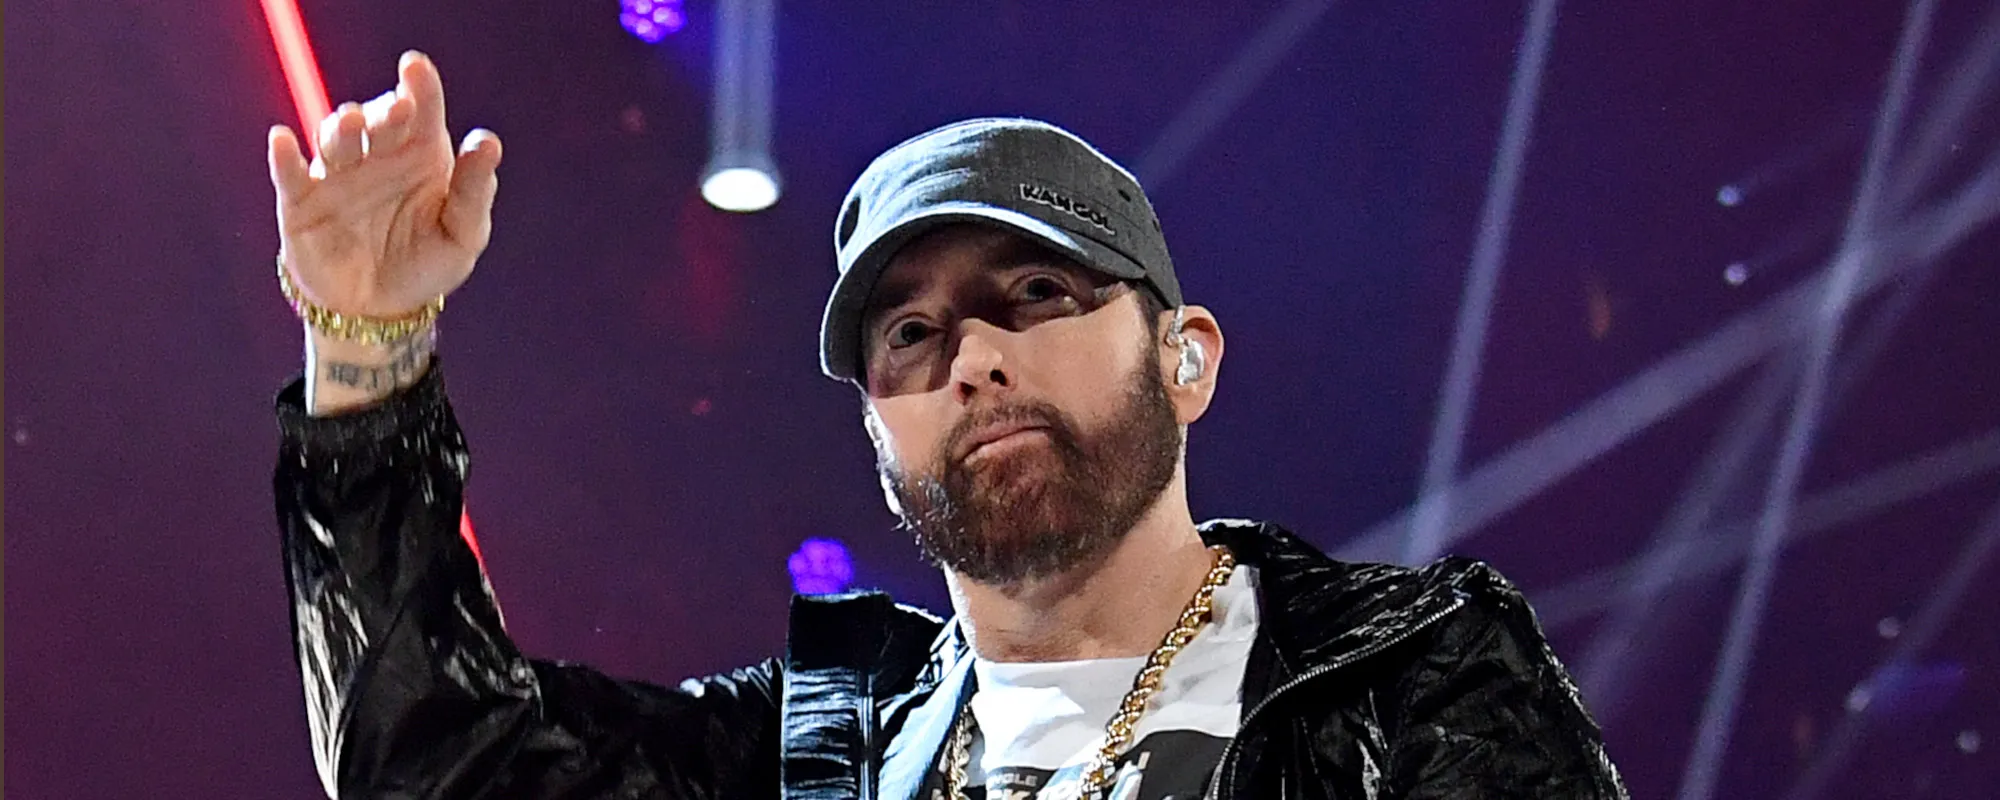 Eminem & Snoop Dog Come Together on New Single with Resolved Beef